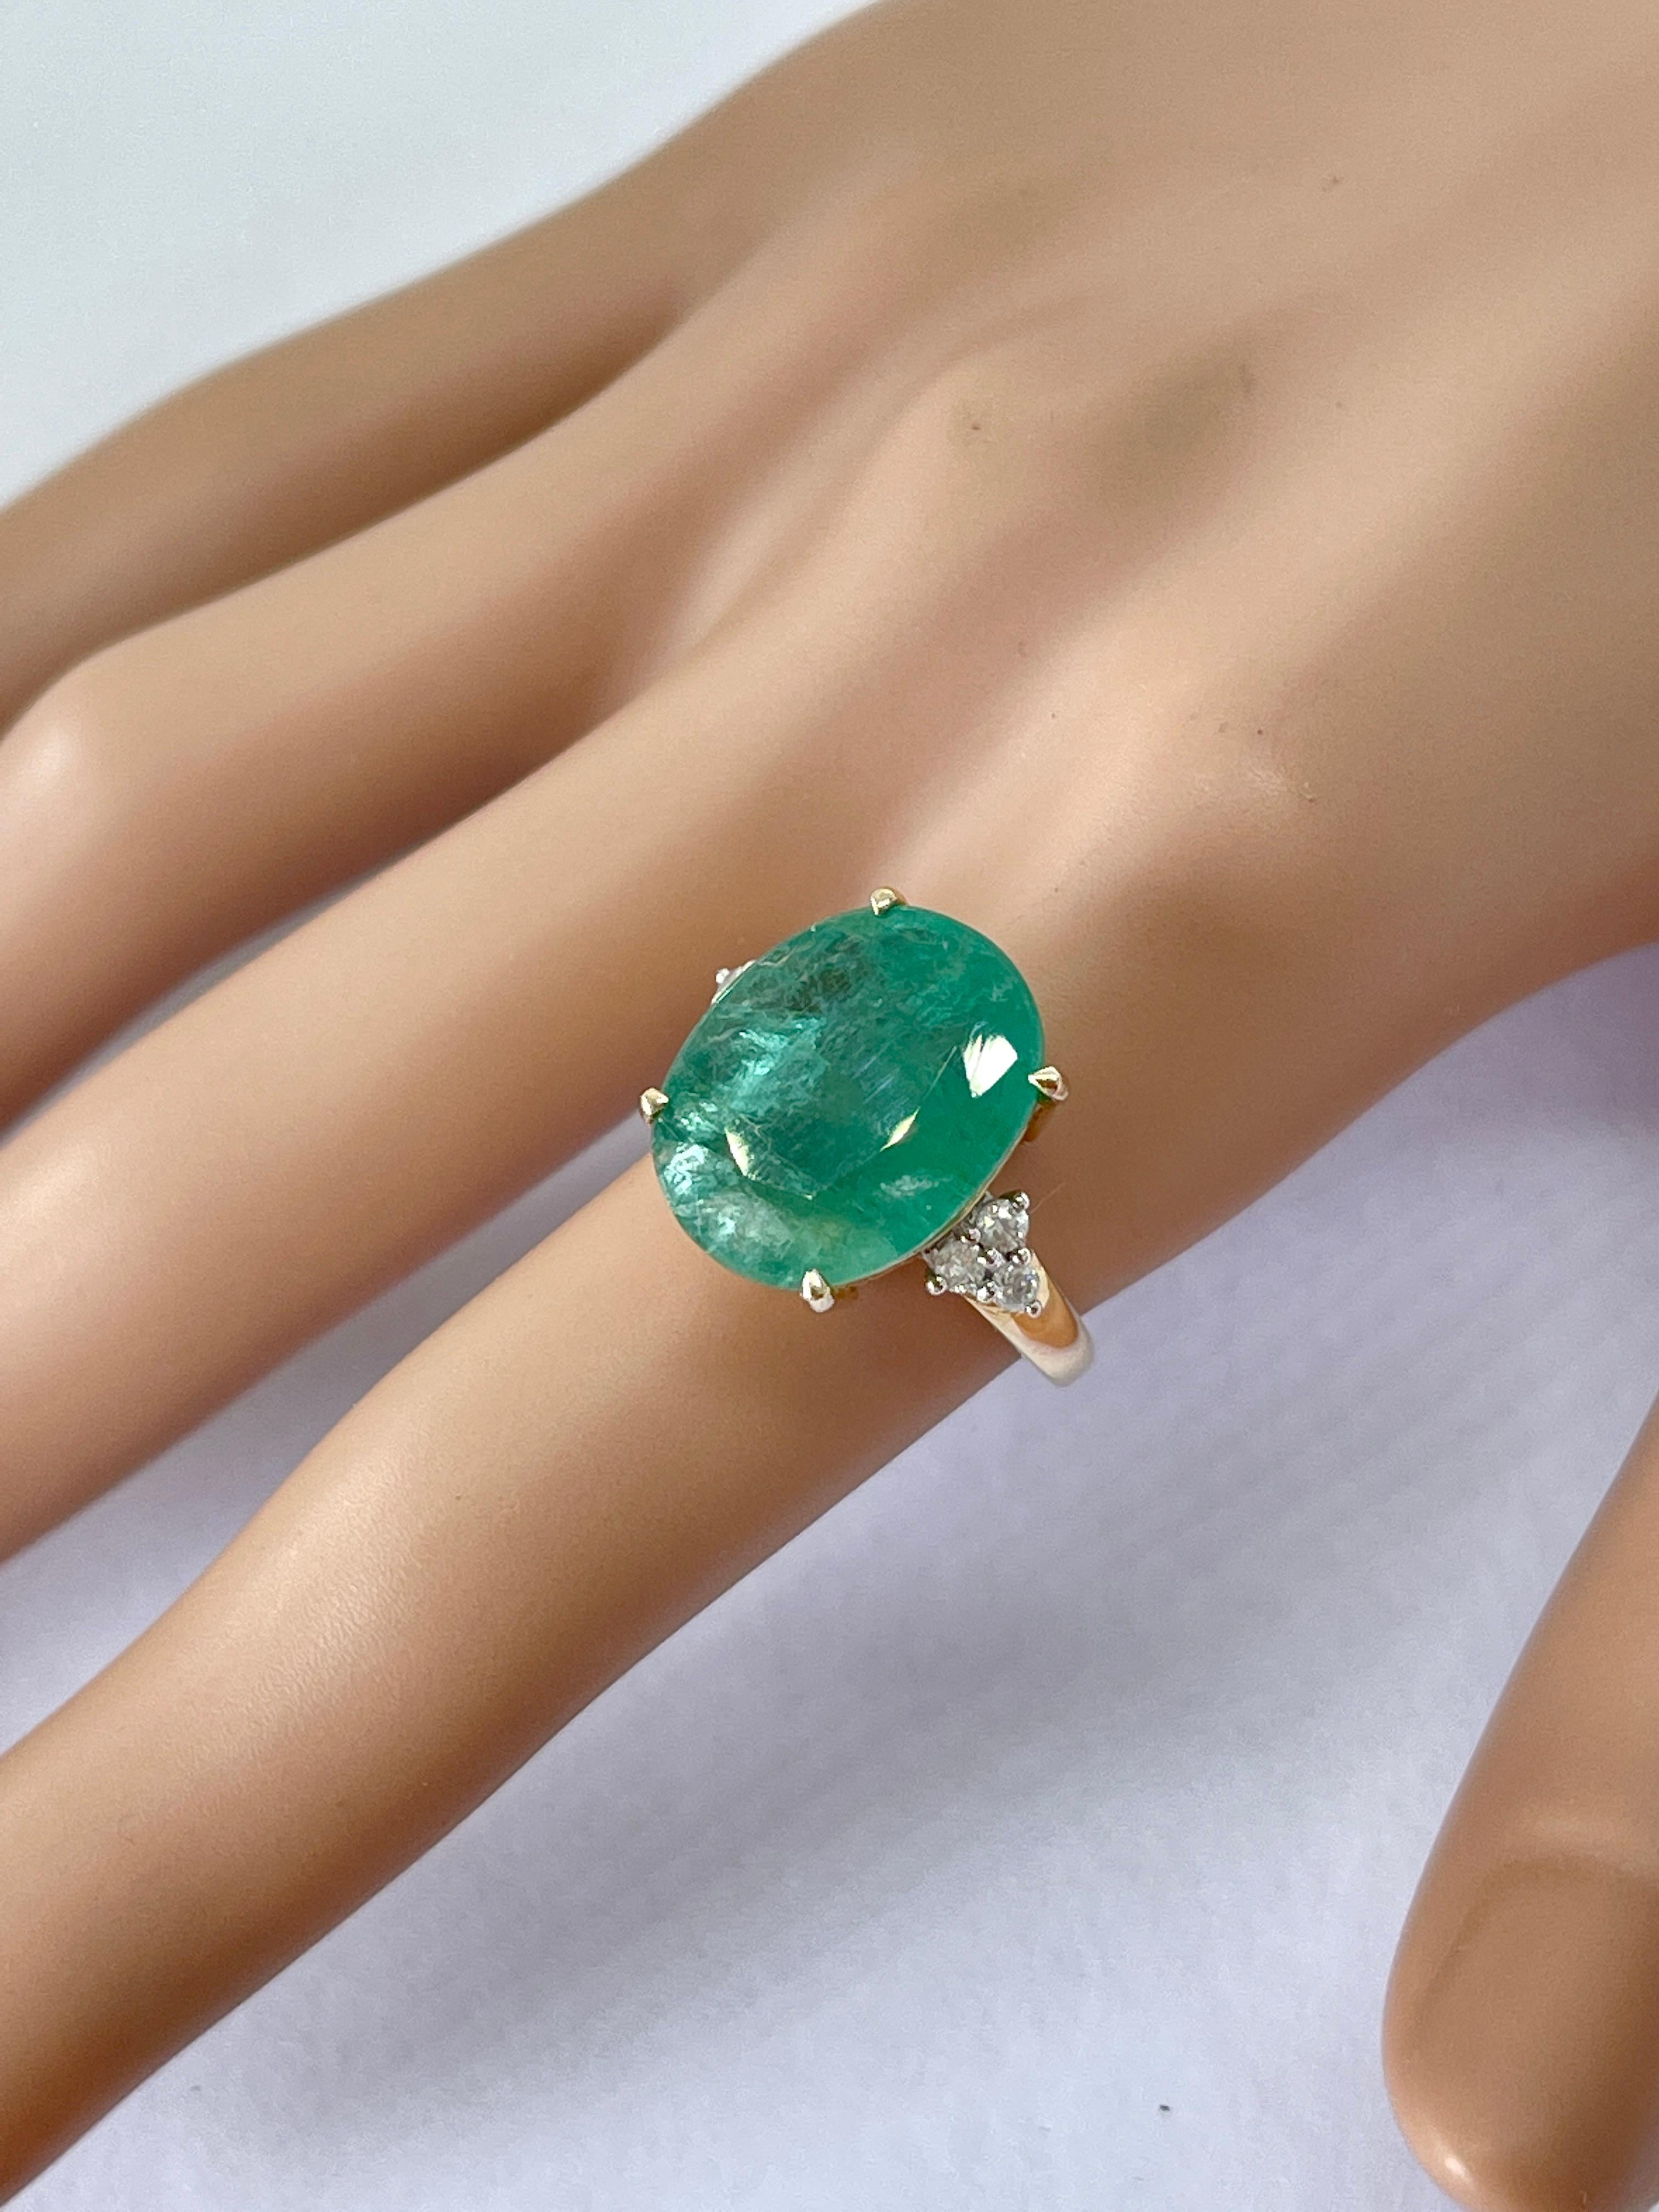 Oval Cut Large 6.06ct Oval Emerald Diamond Ring 9ct Yellow Gold Decorative Gallery For Sale